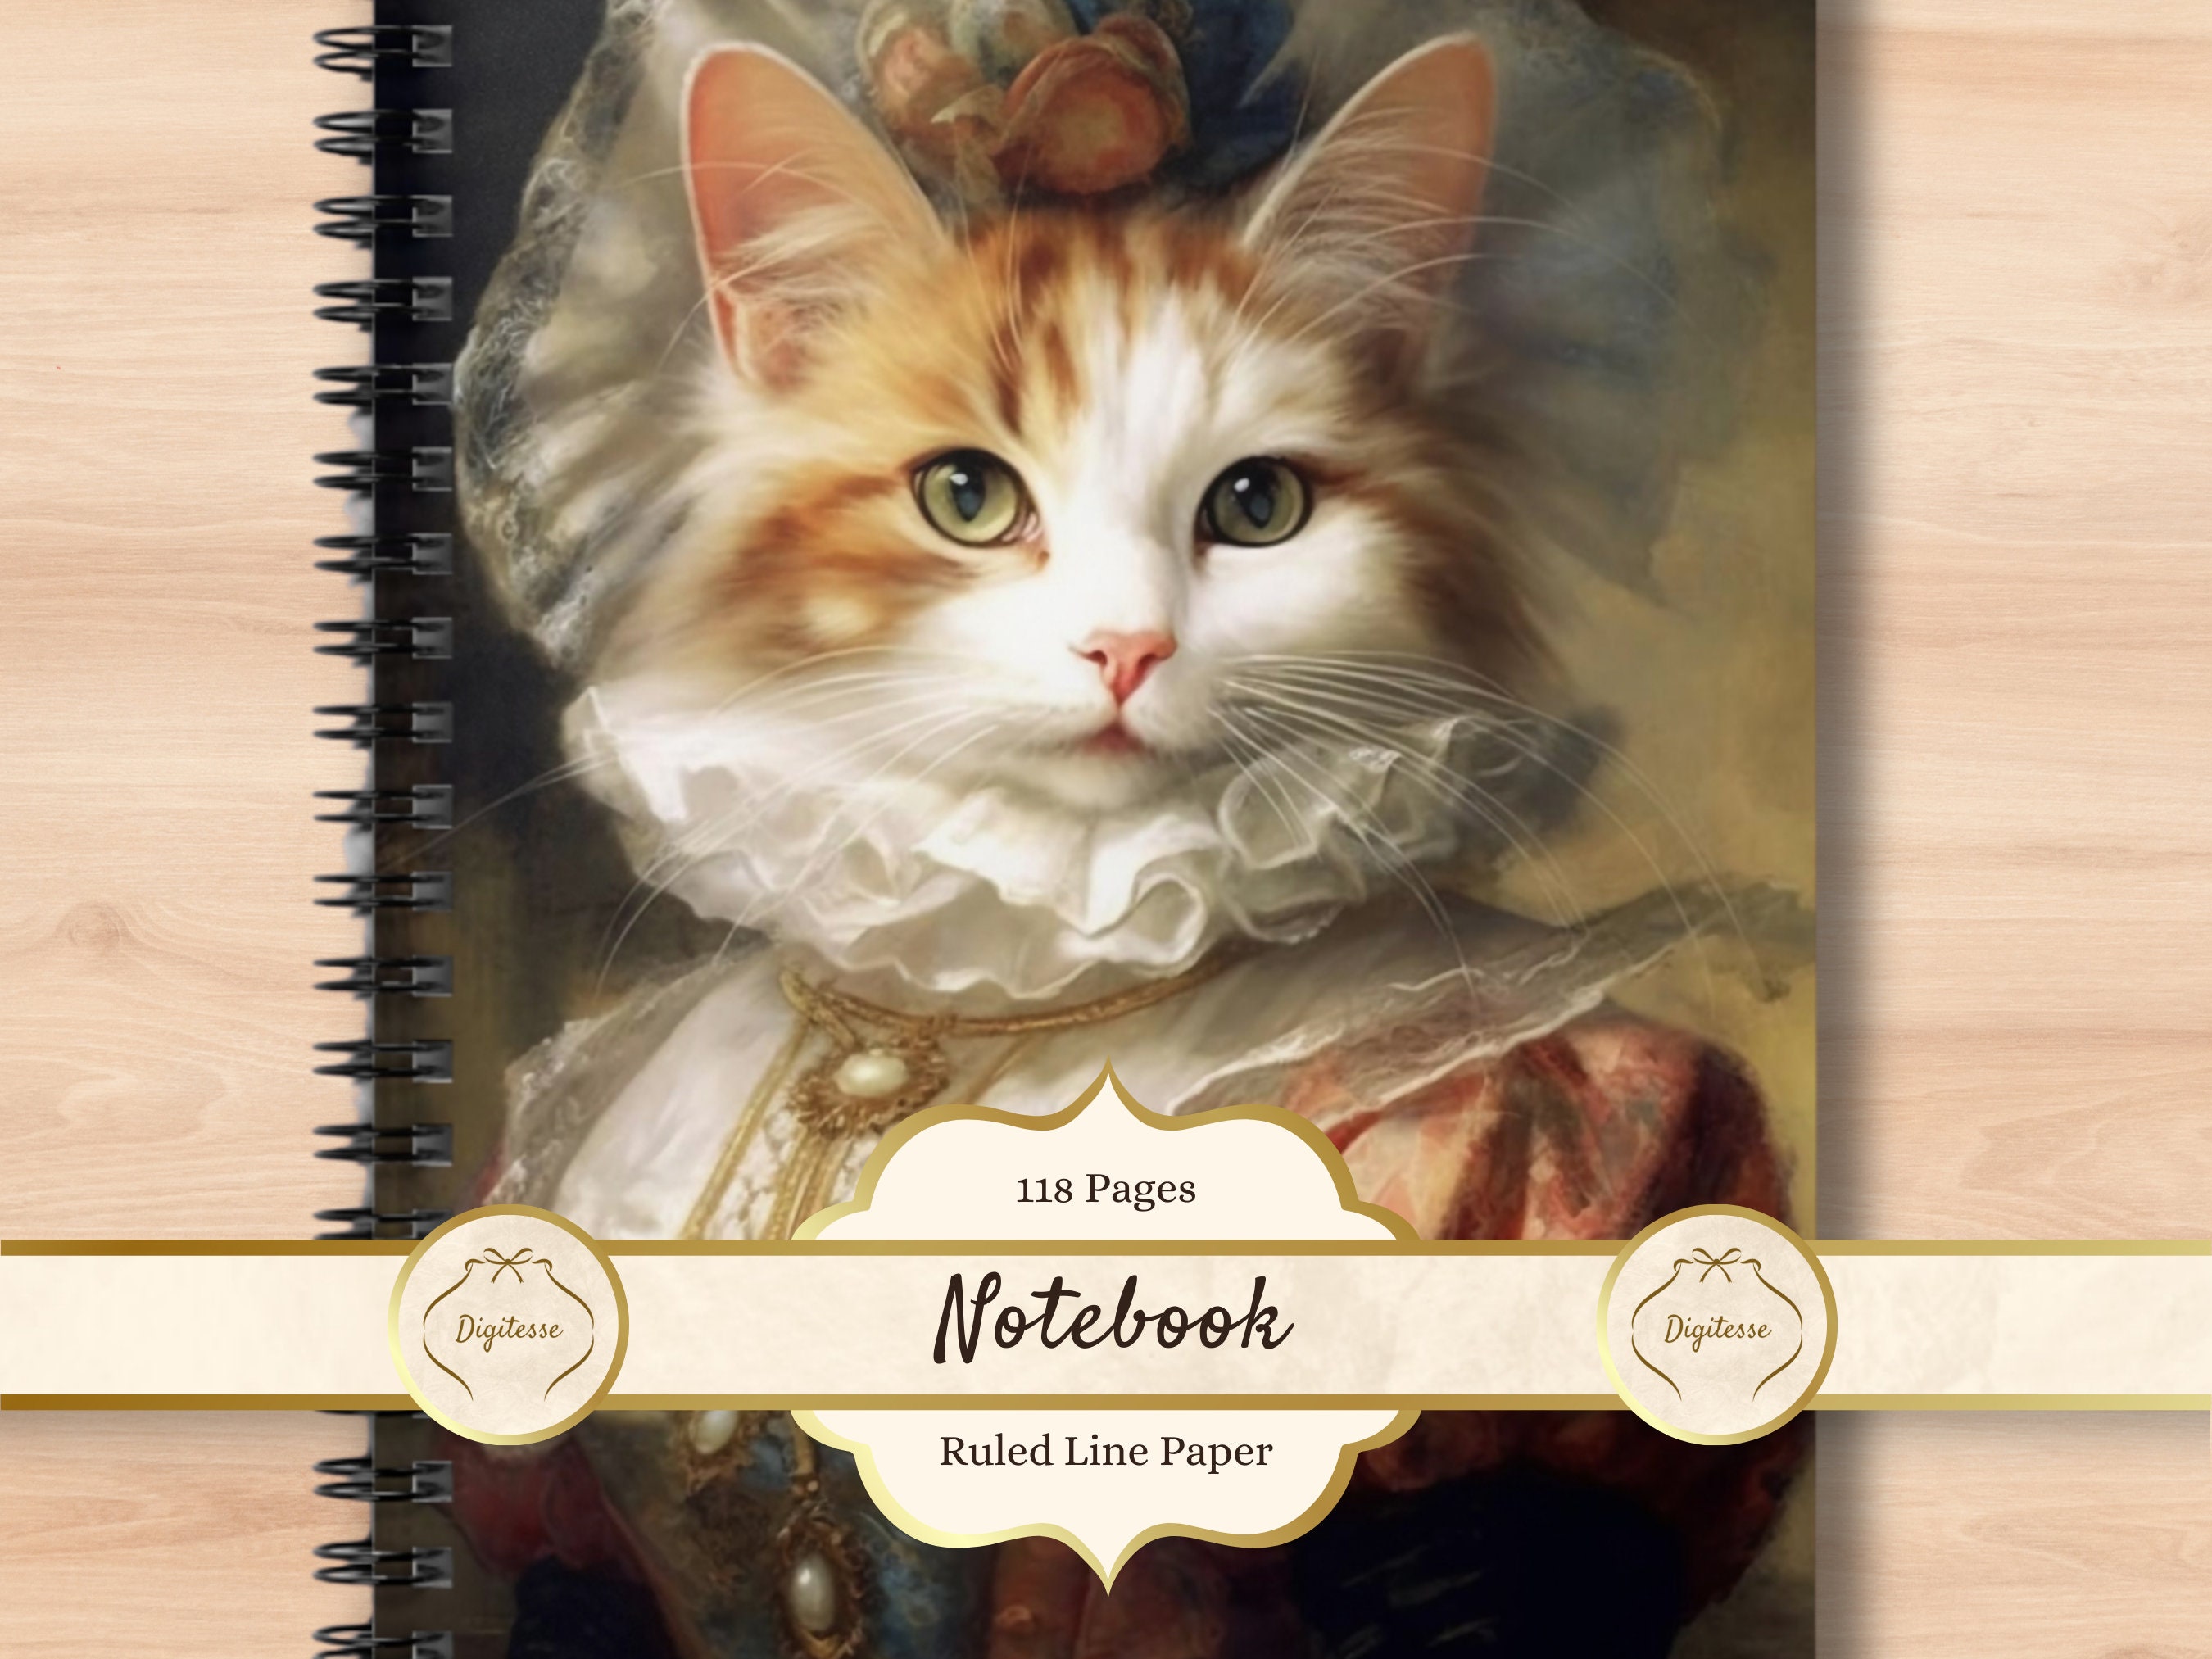 Gray and White Cat Notebook, Stocking Stuffer for Cat Lovers